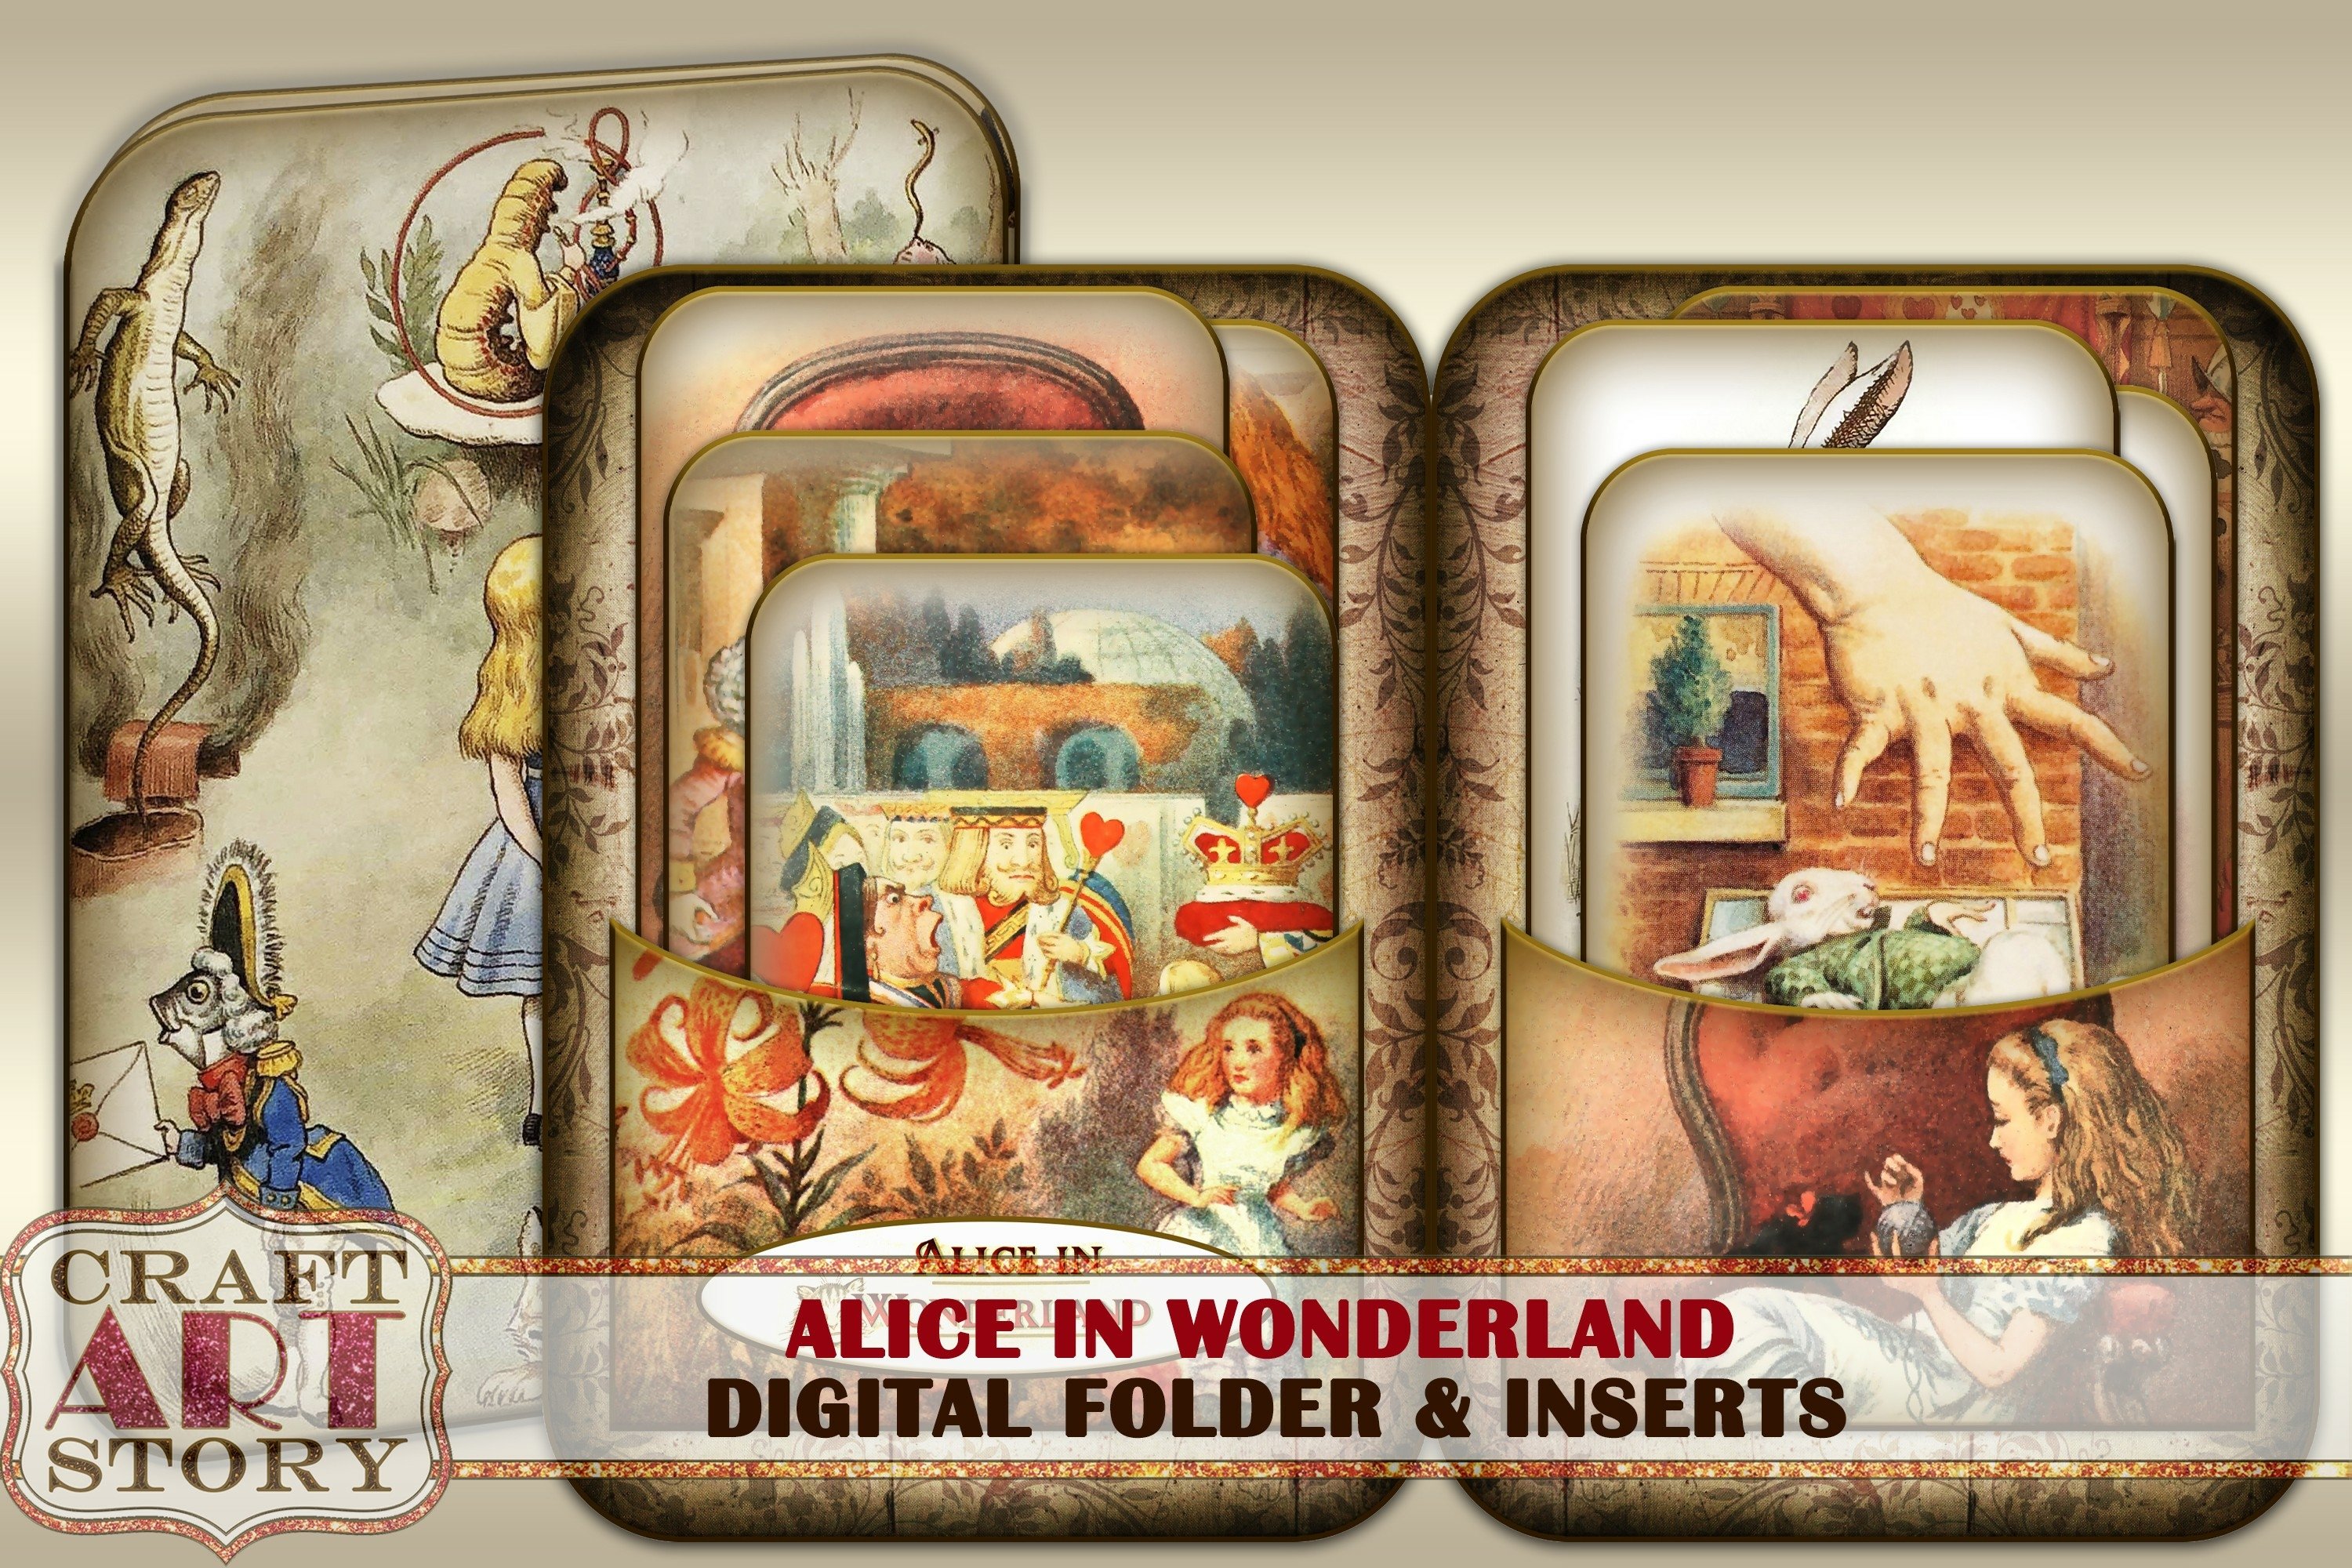 Wonderful paintings with the image of Alice.